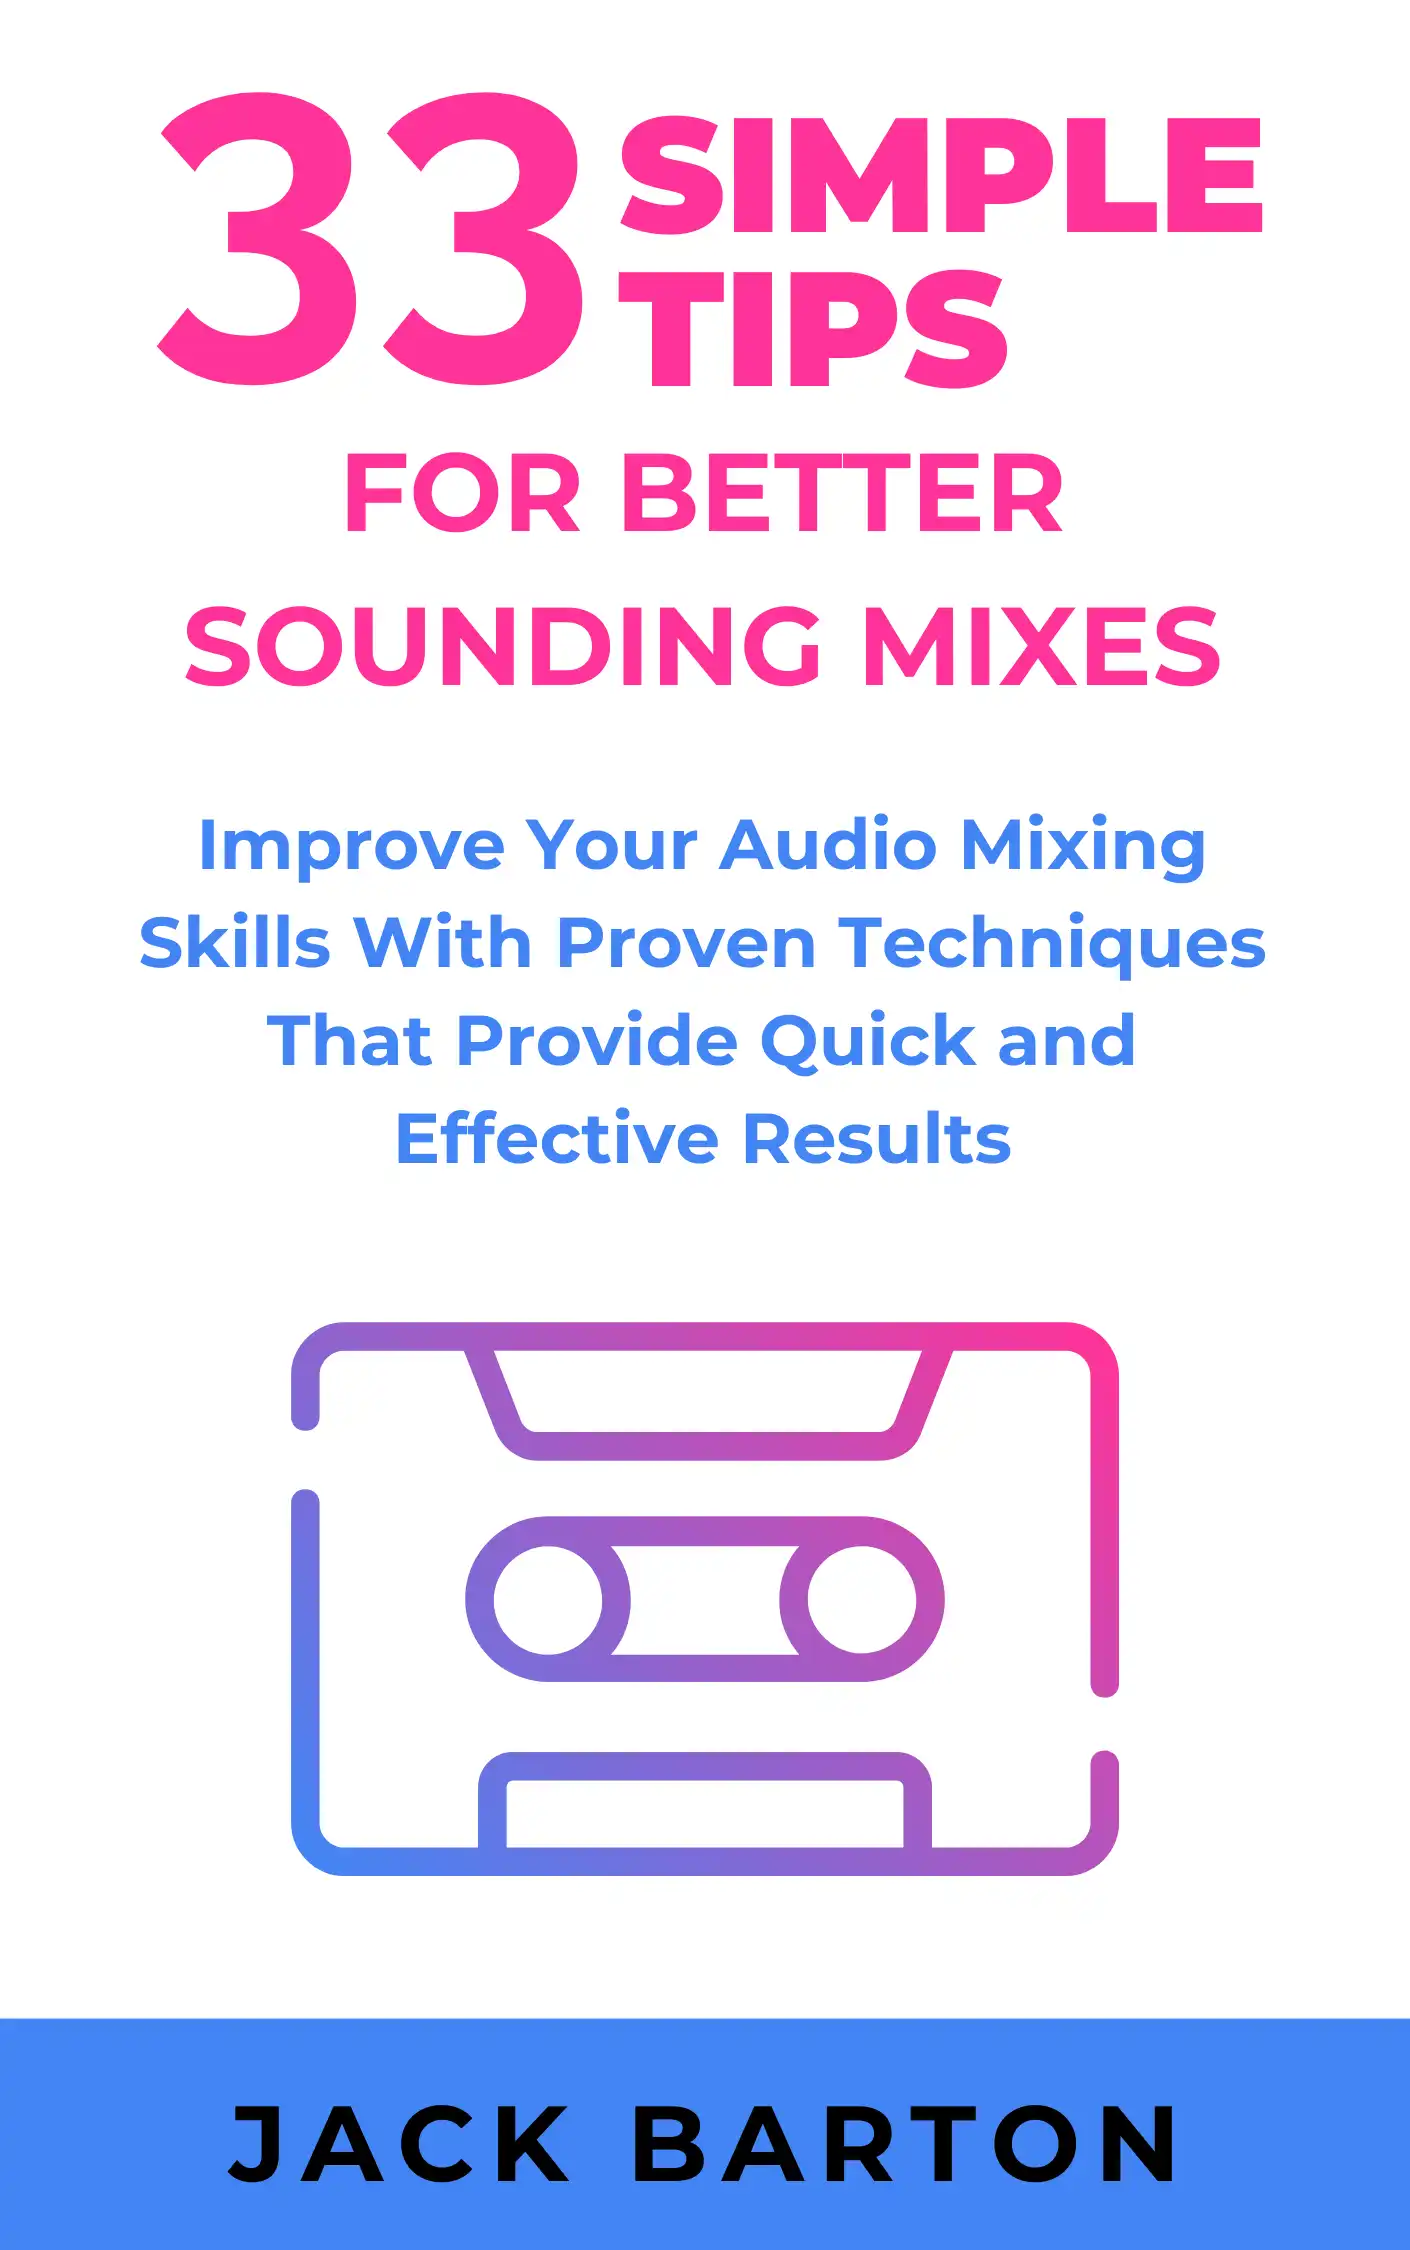 33 Simple Tips for Better Sounding Mixes